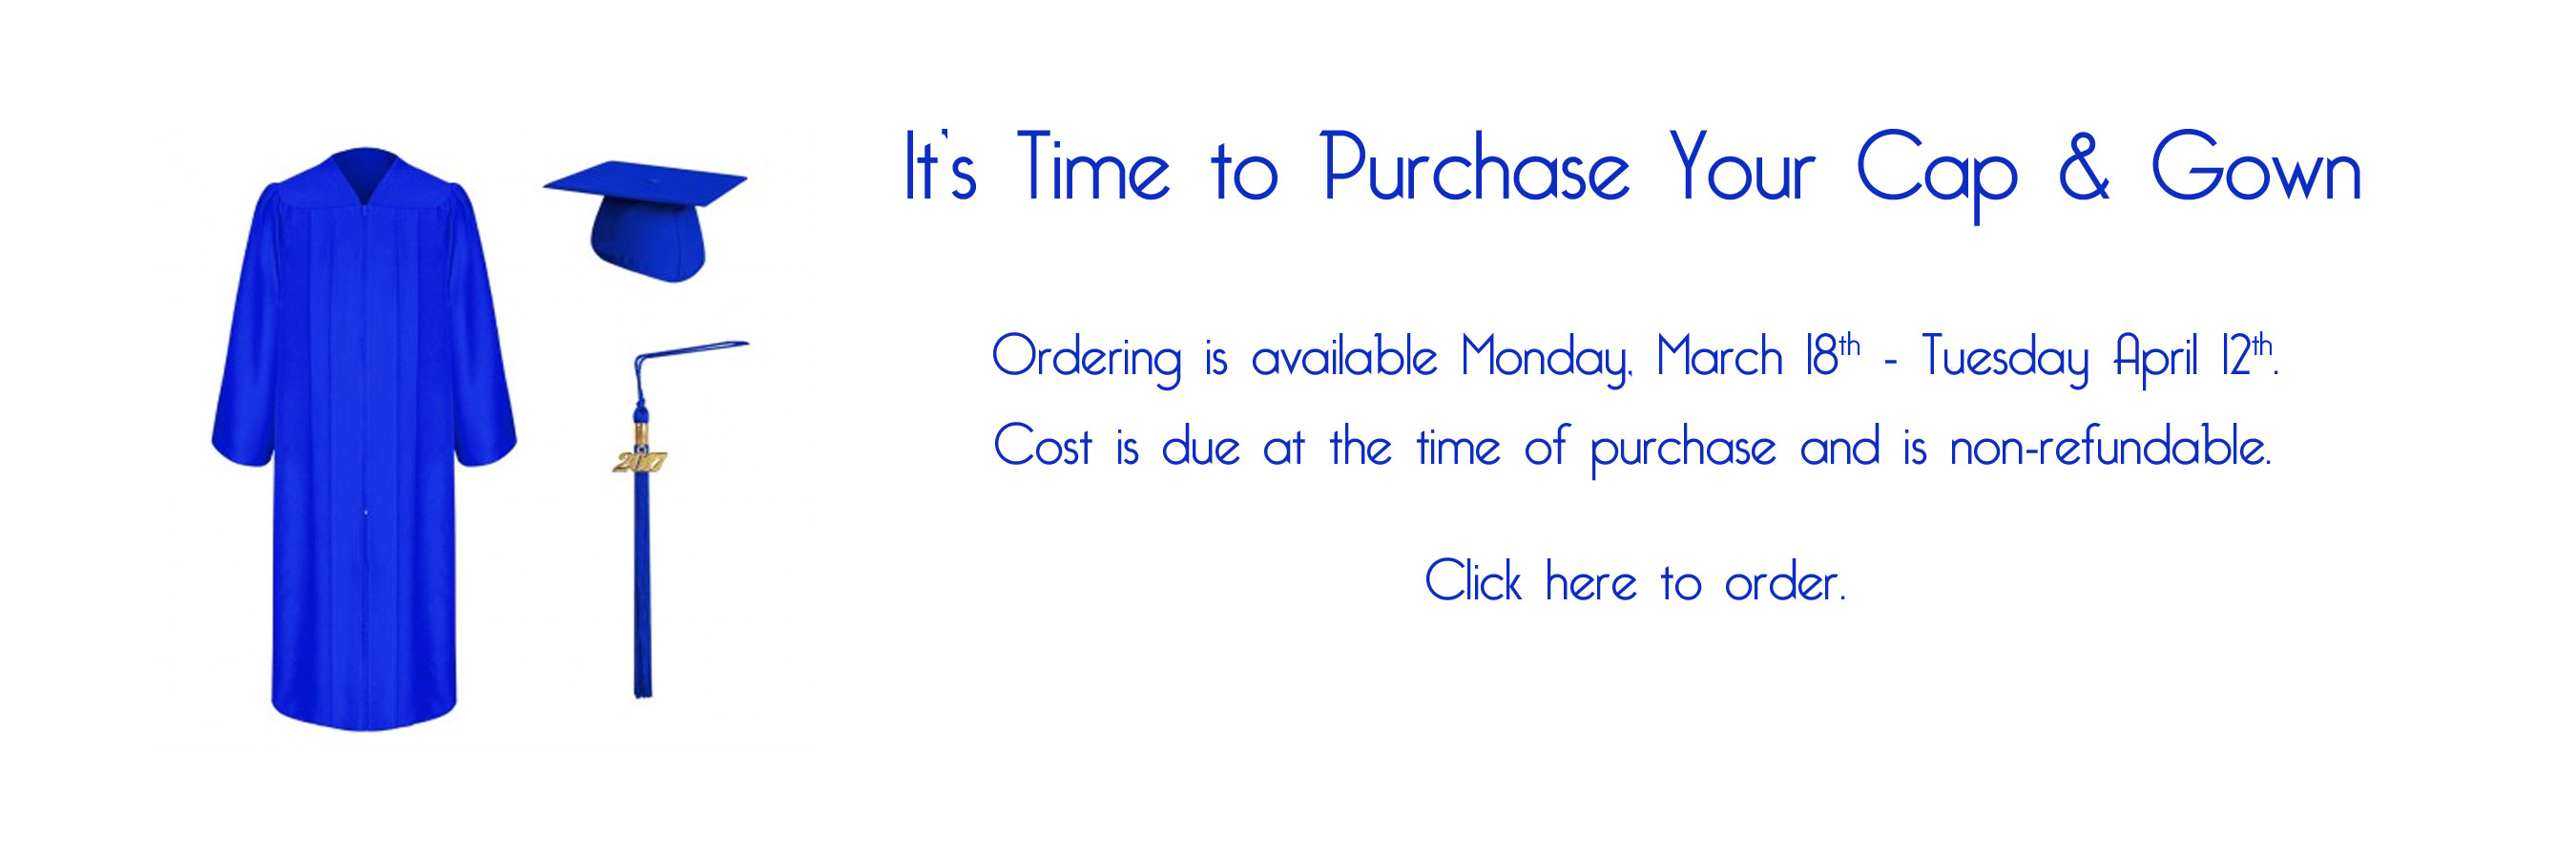 Click here to order cap and gown 